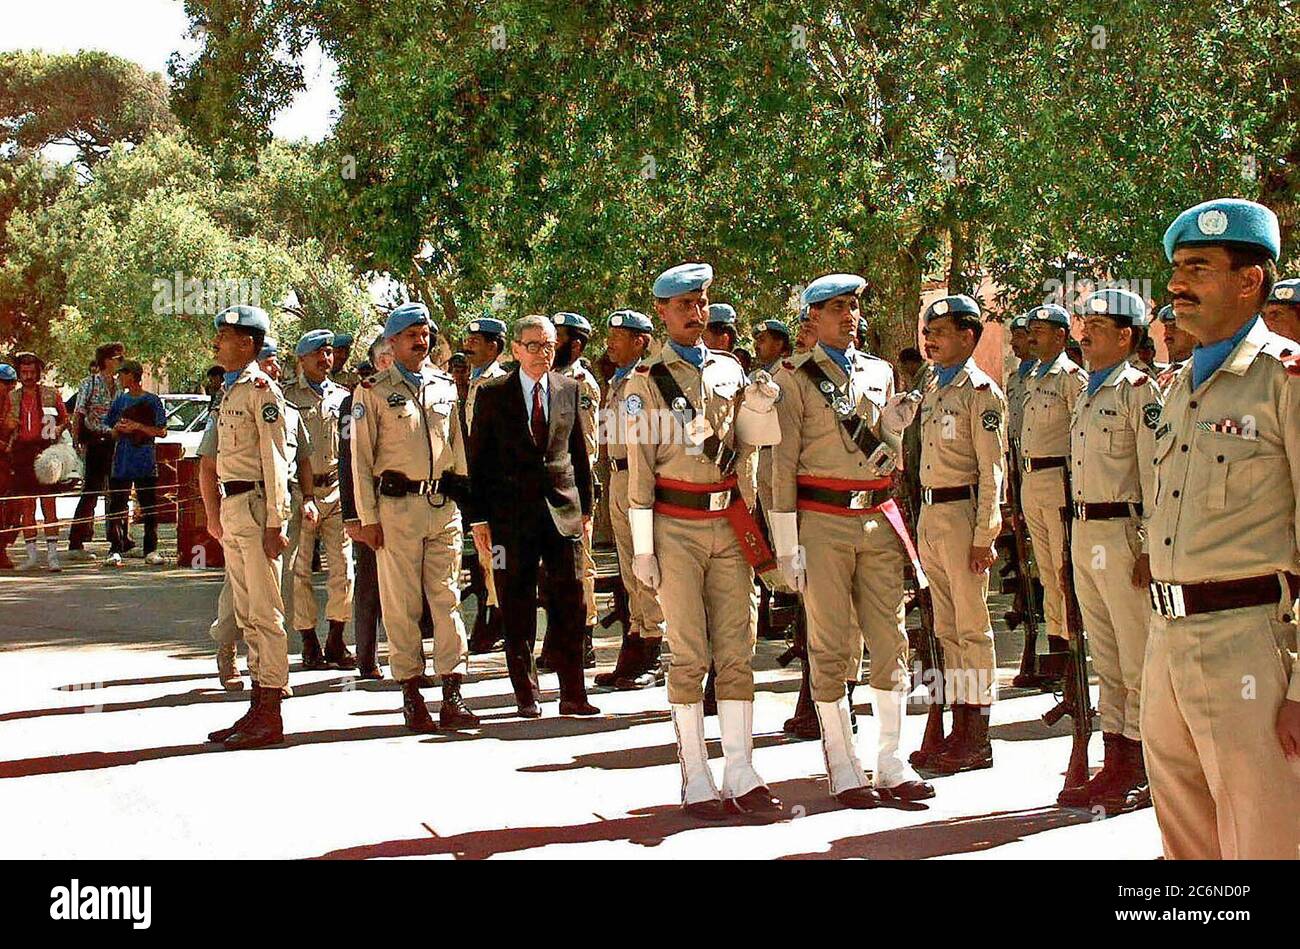 United Nations Secretary GEN Boutros Boutros-Ghali reviews Pakistani troops in formation at the Mogadishu Airport.  The Secretary General is in Somalia for meetings and briefings on Operation Restore Hope. Stock Photo